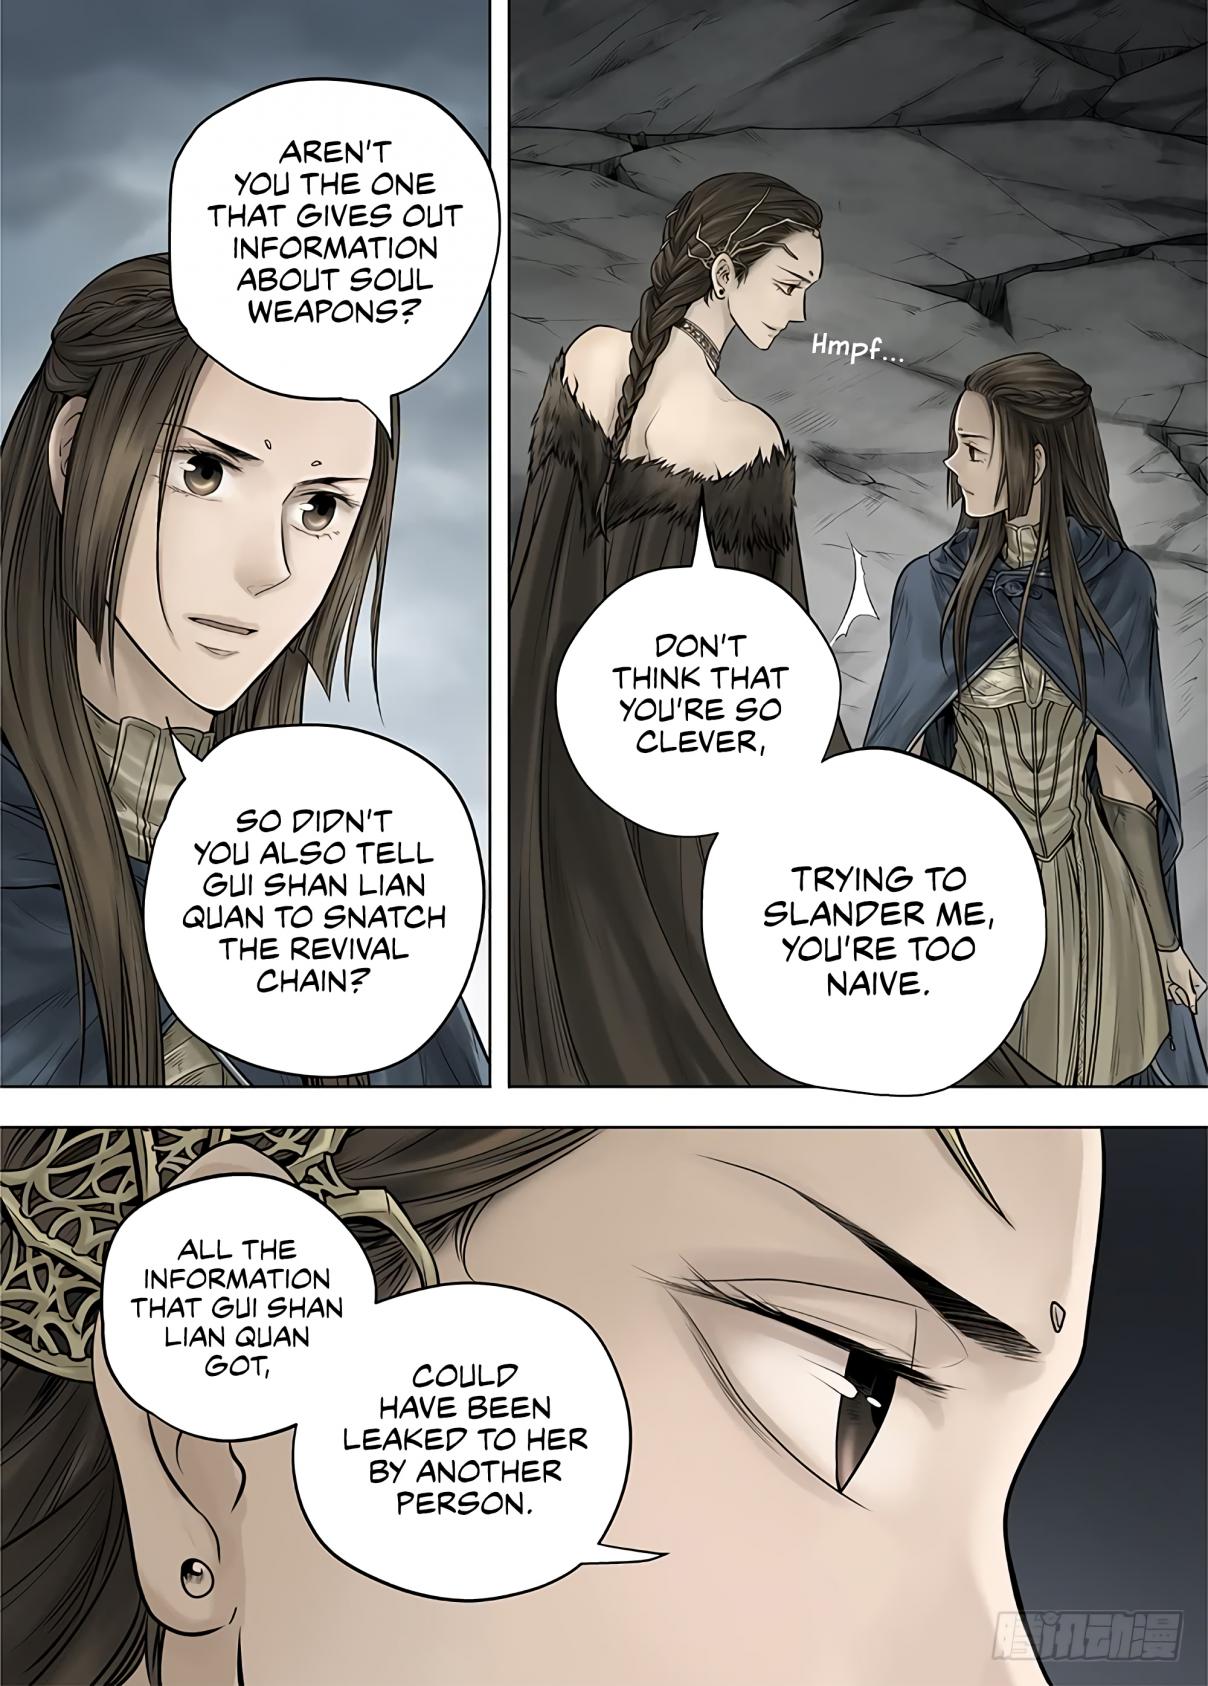 L.O.R.D: Legend of Ravaging Dynasties Ch. 29 The Slaughtering Ones